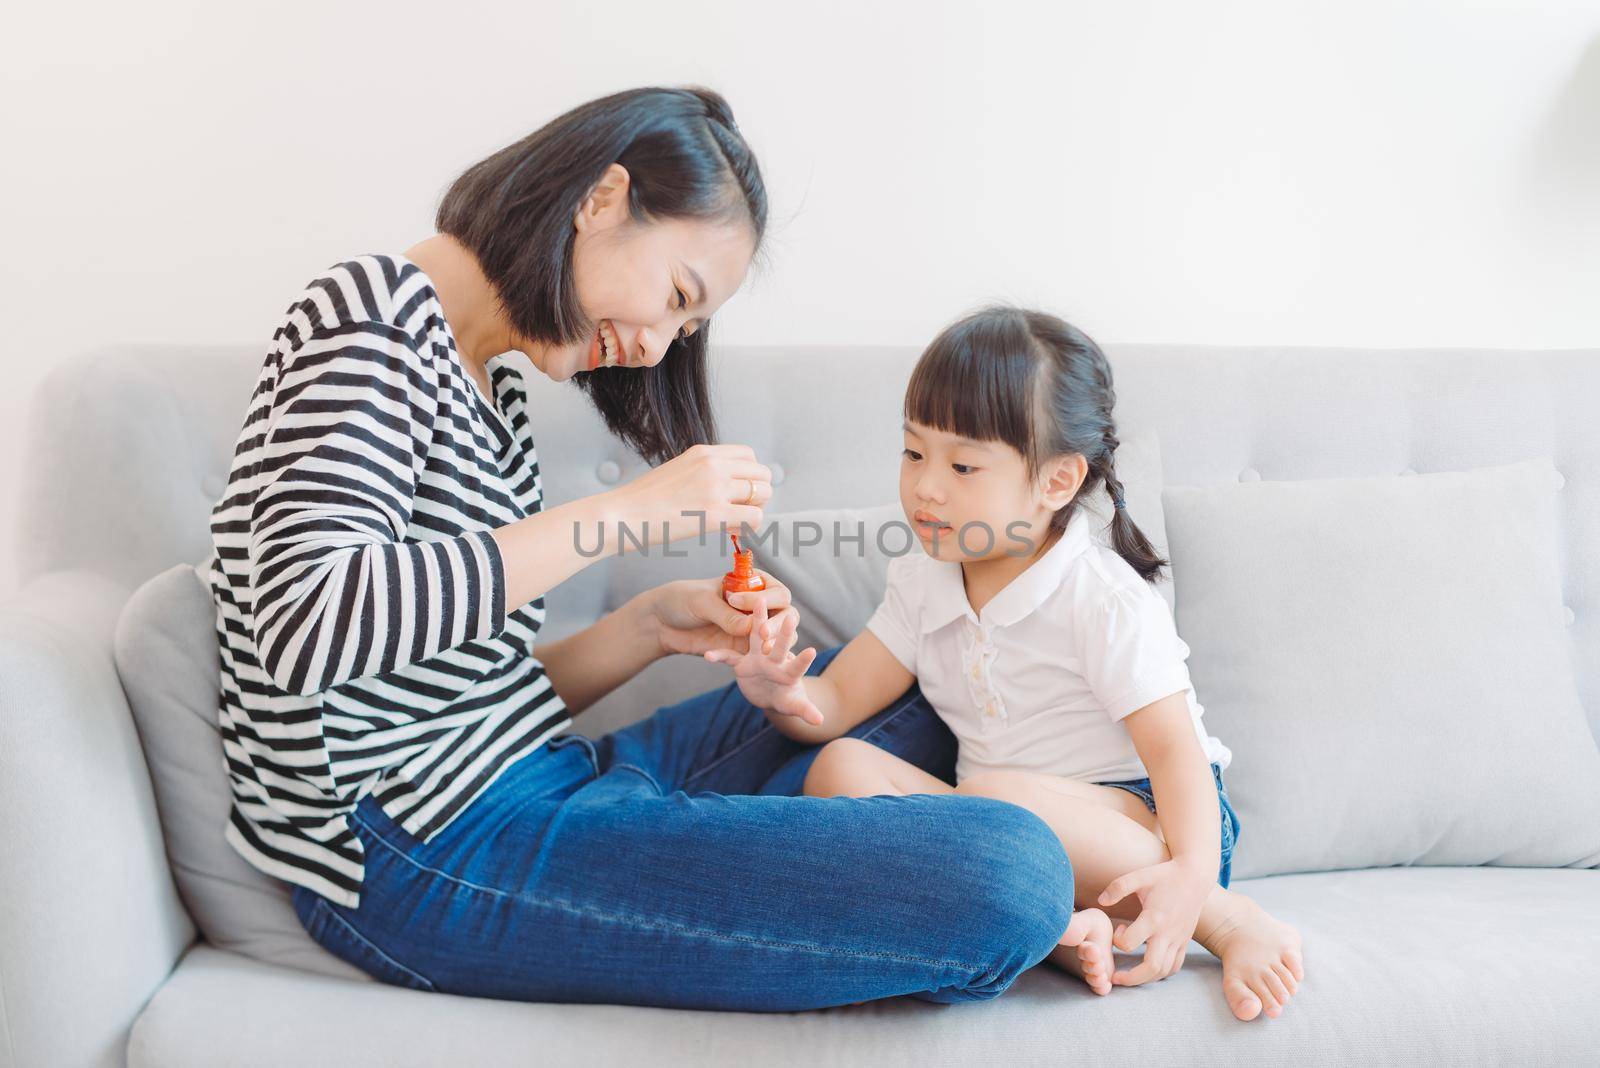 Mother and daughter having fun painting fingernails, family time concept